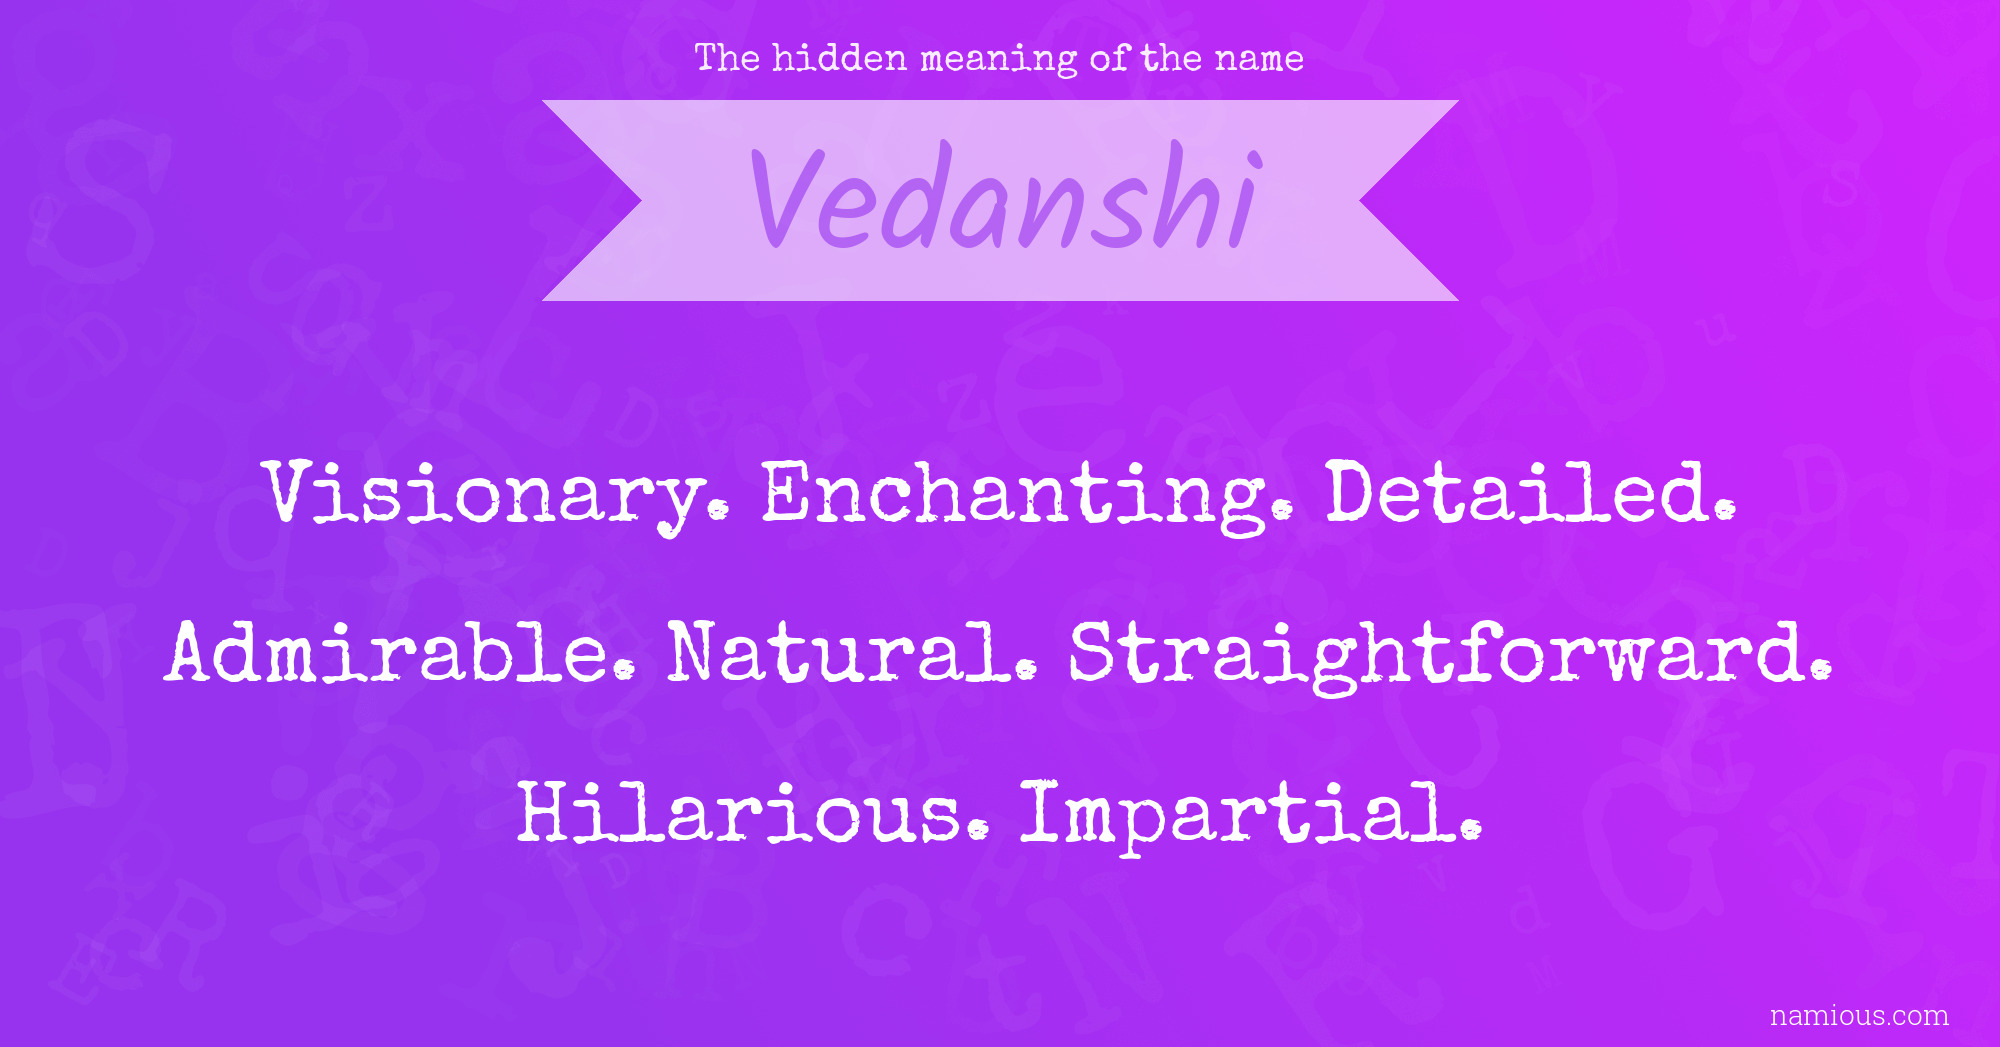 The hidden meaning of the name Vedanshi